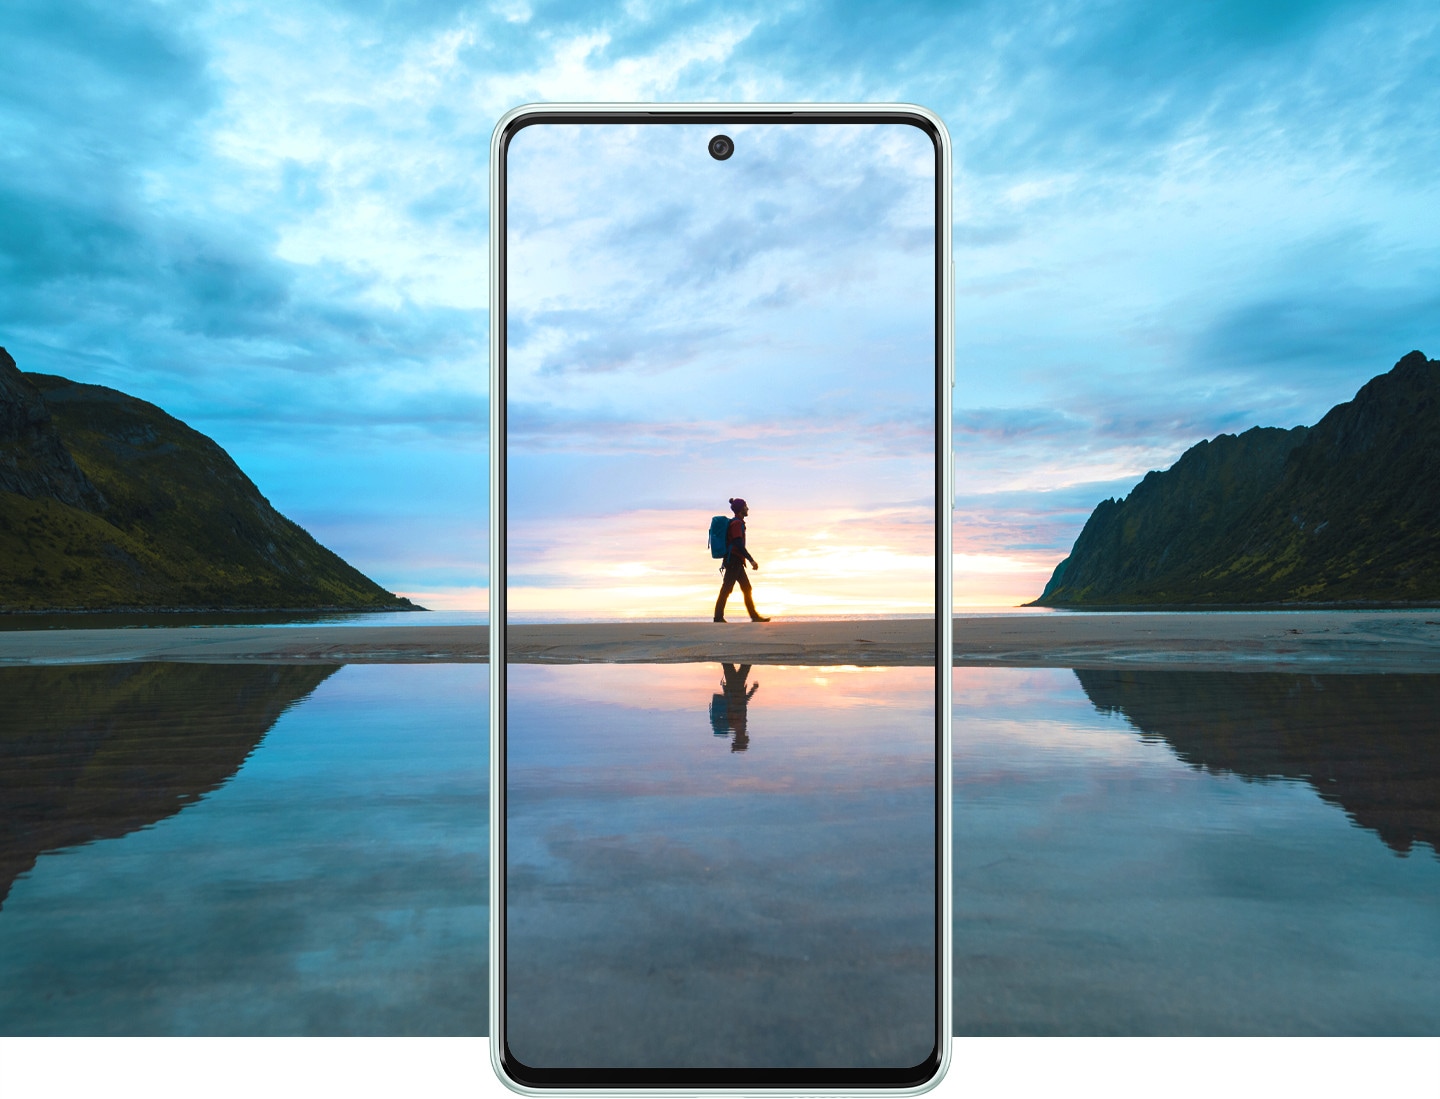 Samsung Galaxy A73 5G Specs, Features and release date - A traveler wearing a backpack is captured inside the screen, which also shows a sunrise view.